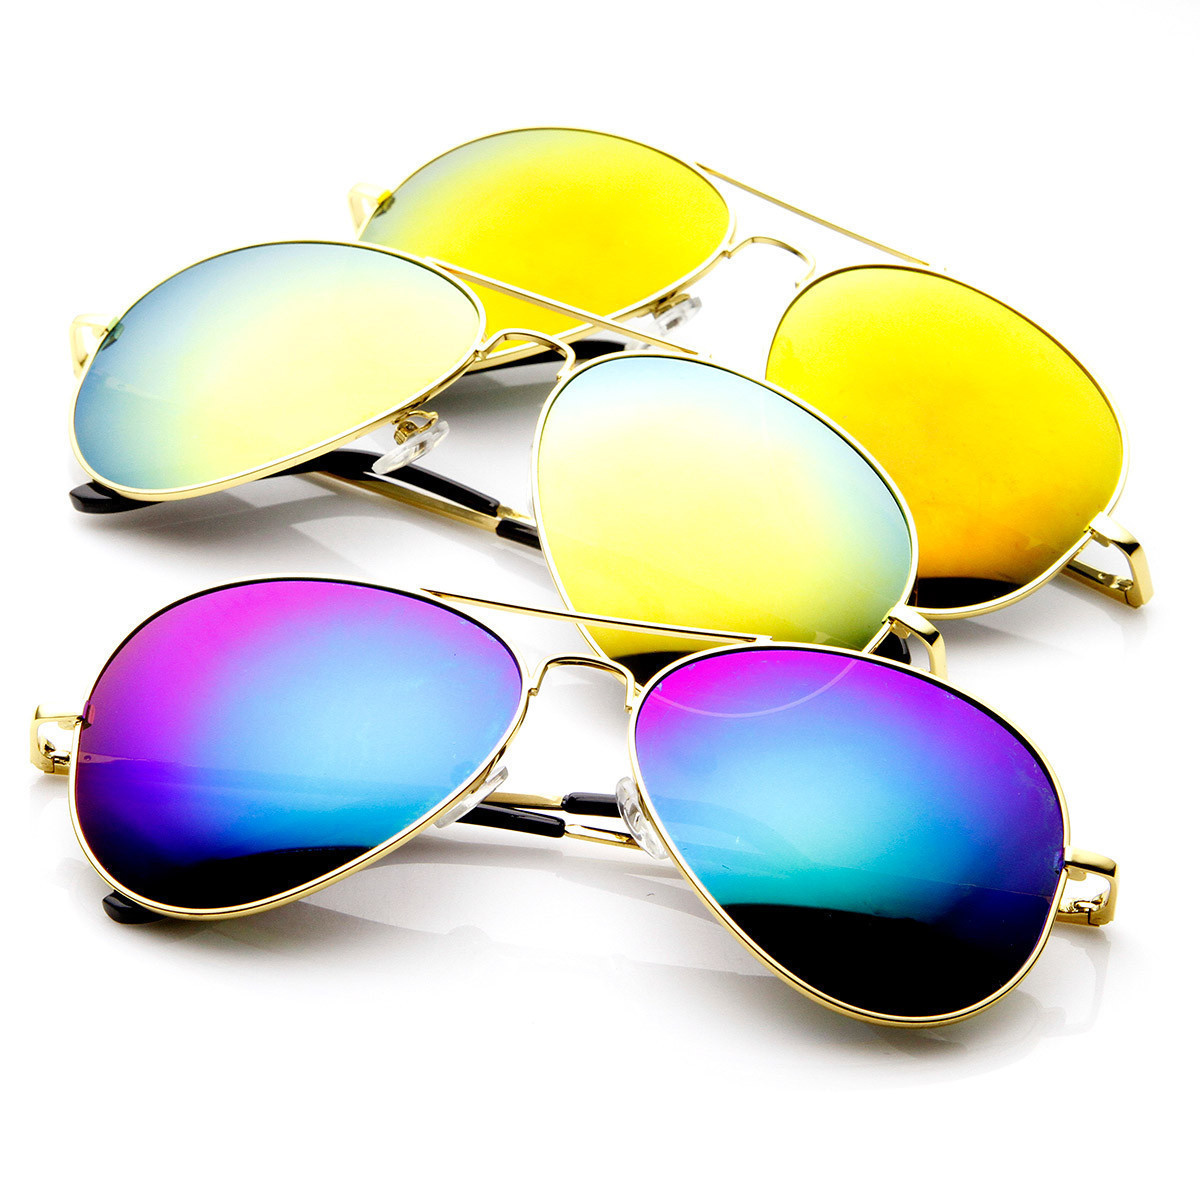 Classic Metal Teardrop Color Mirror Lens Aviator Sunglasses W/ Spring Hinges - 1486 - Gold / Red Mirror